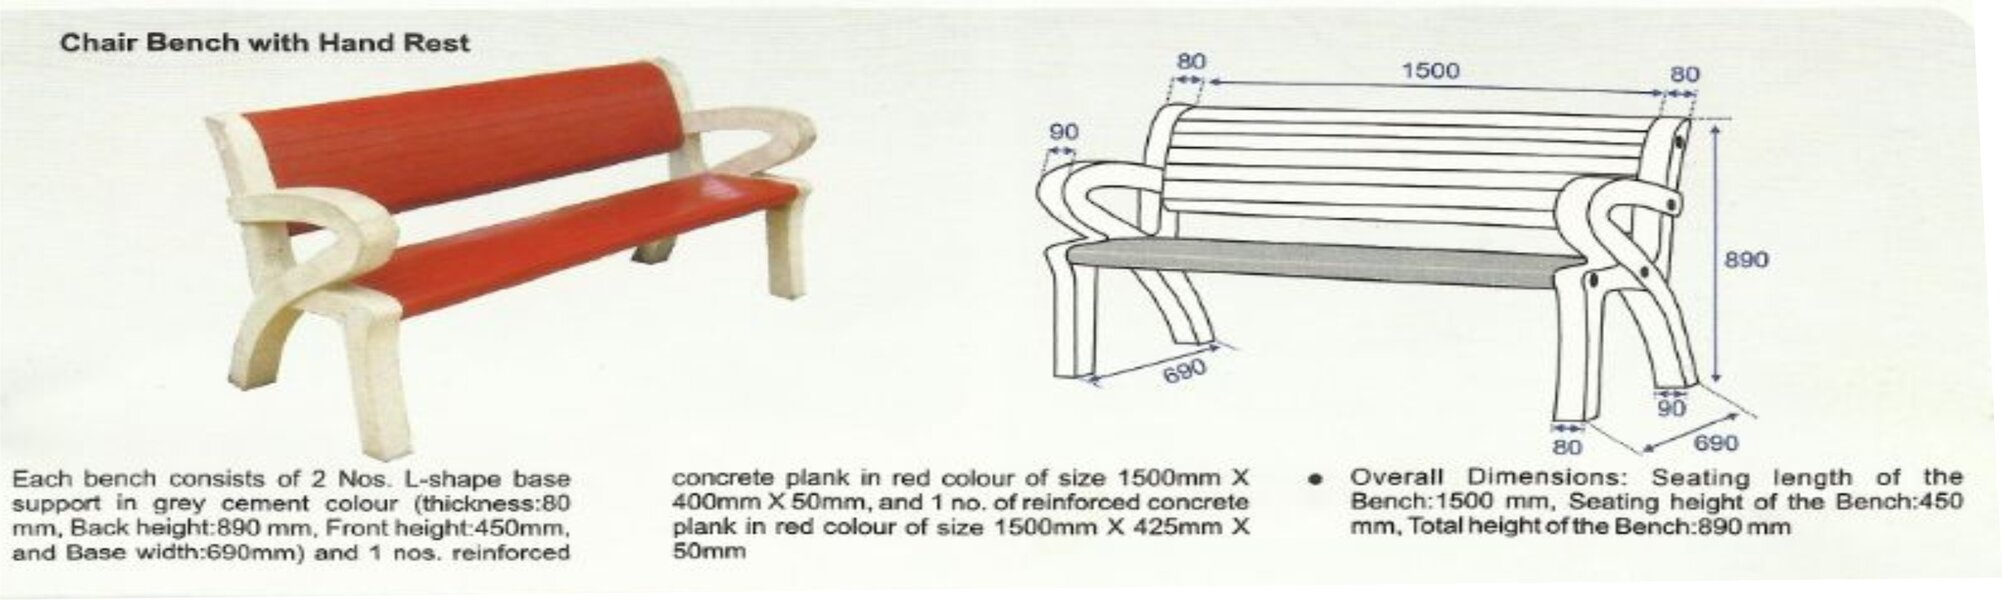 CHAIR BENCH WITH HAND REST WITH DETAILS .jpg